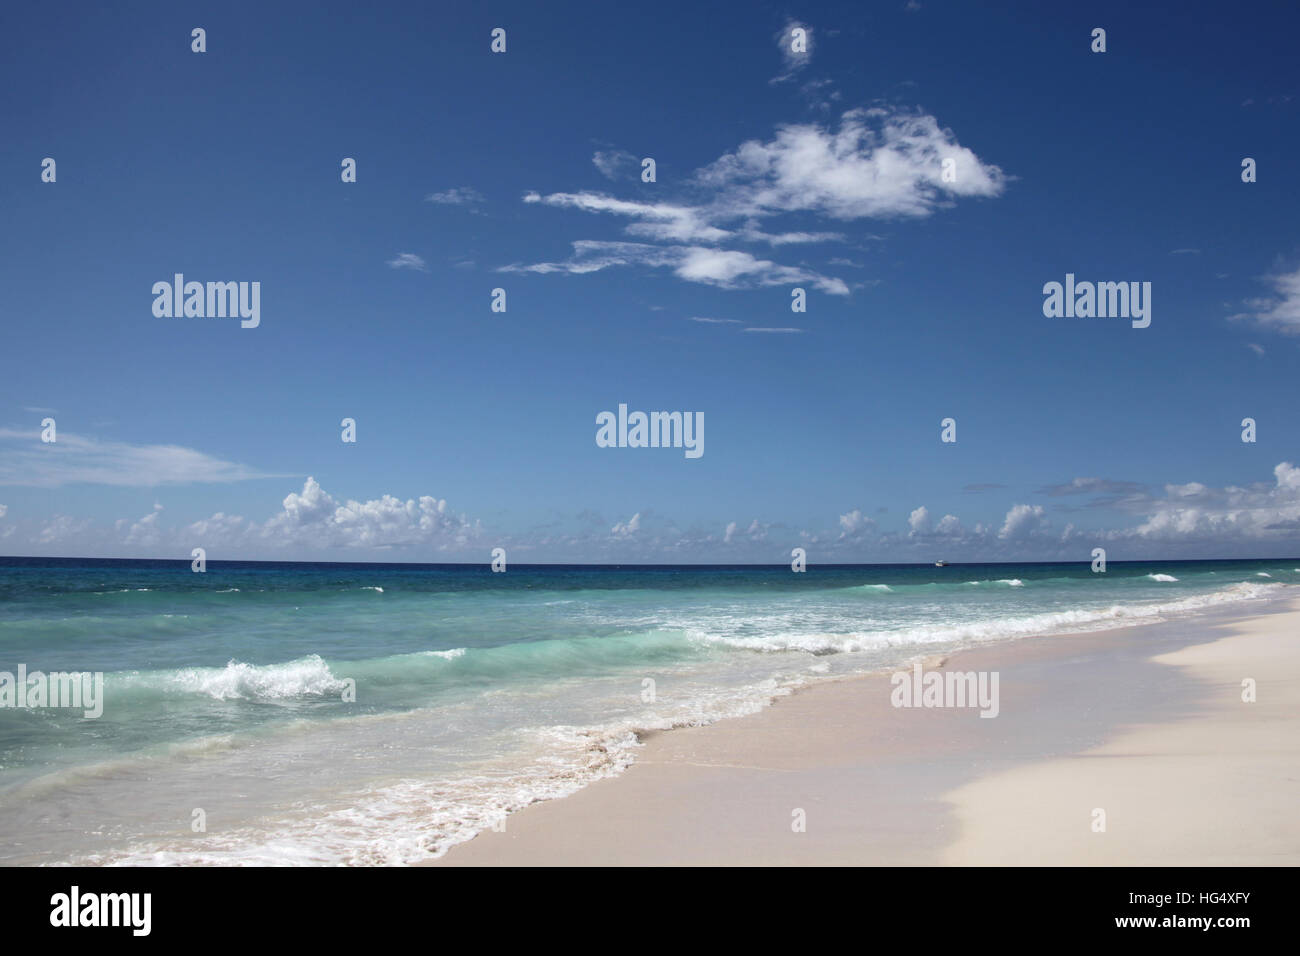 Beautiful Time N Place beach with blue sky, turquoise water & white sand, Falmouth, Jamaica, Caribbean. Stock Photo